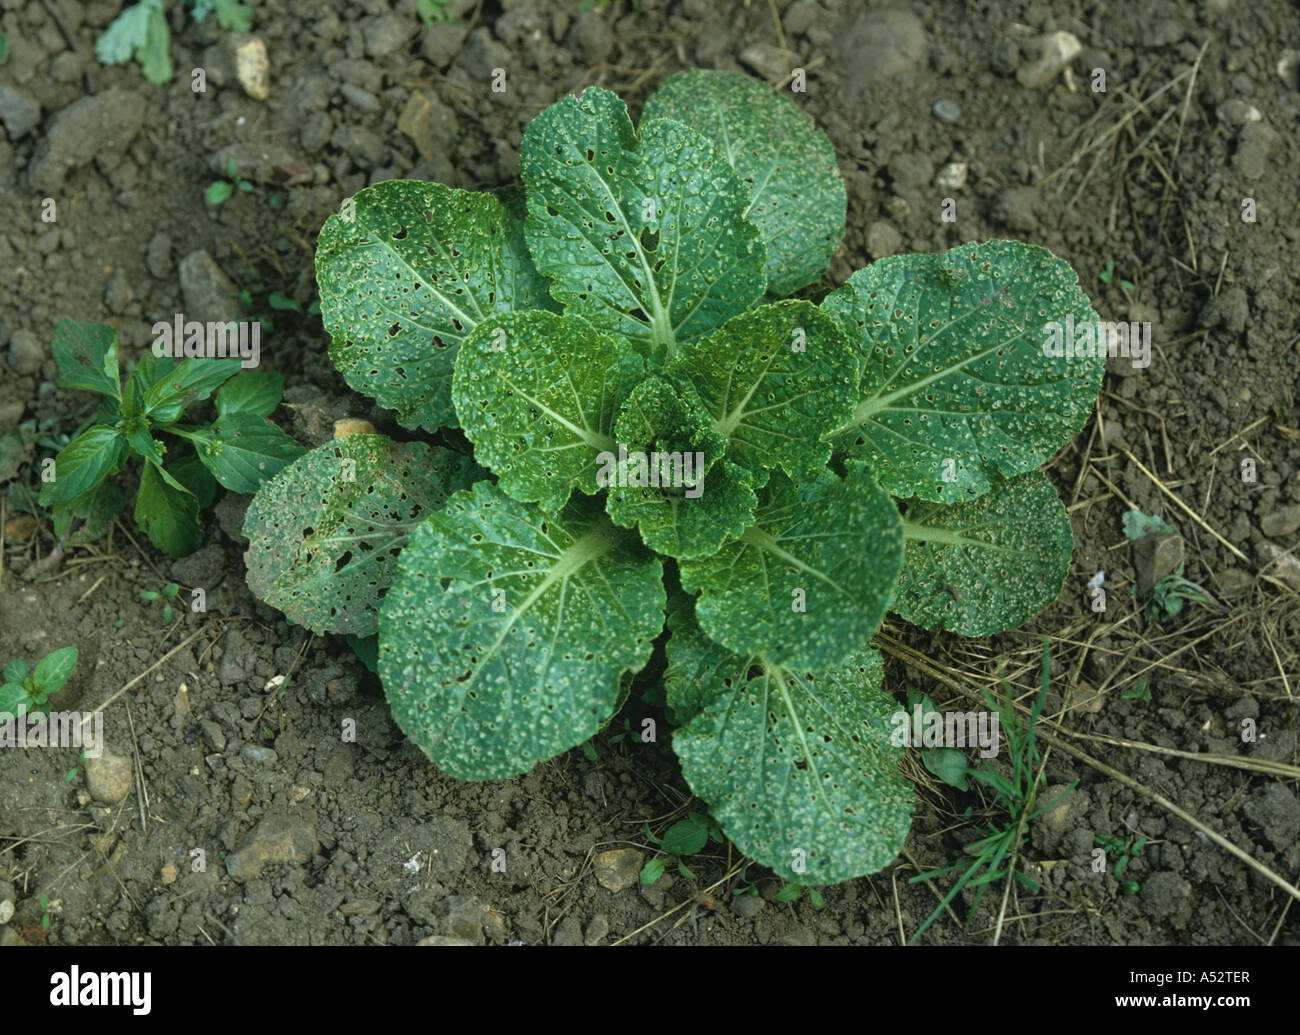 Severe damage to a brassica plant caused by flea beetle Phyllotreta sp feeding Stock Photo